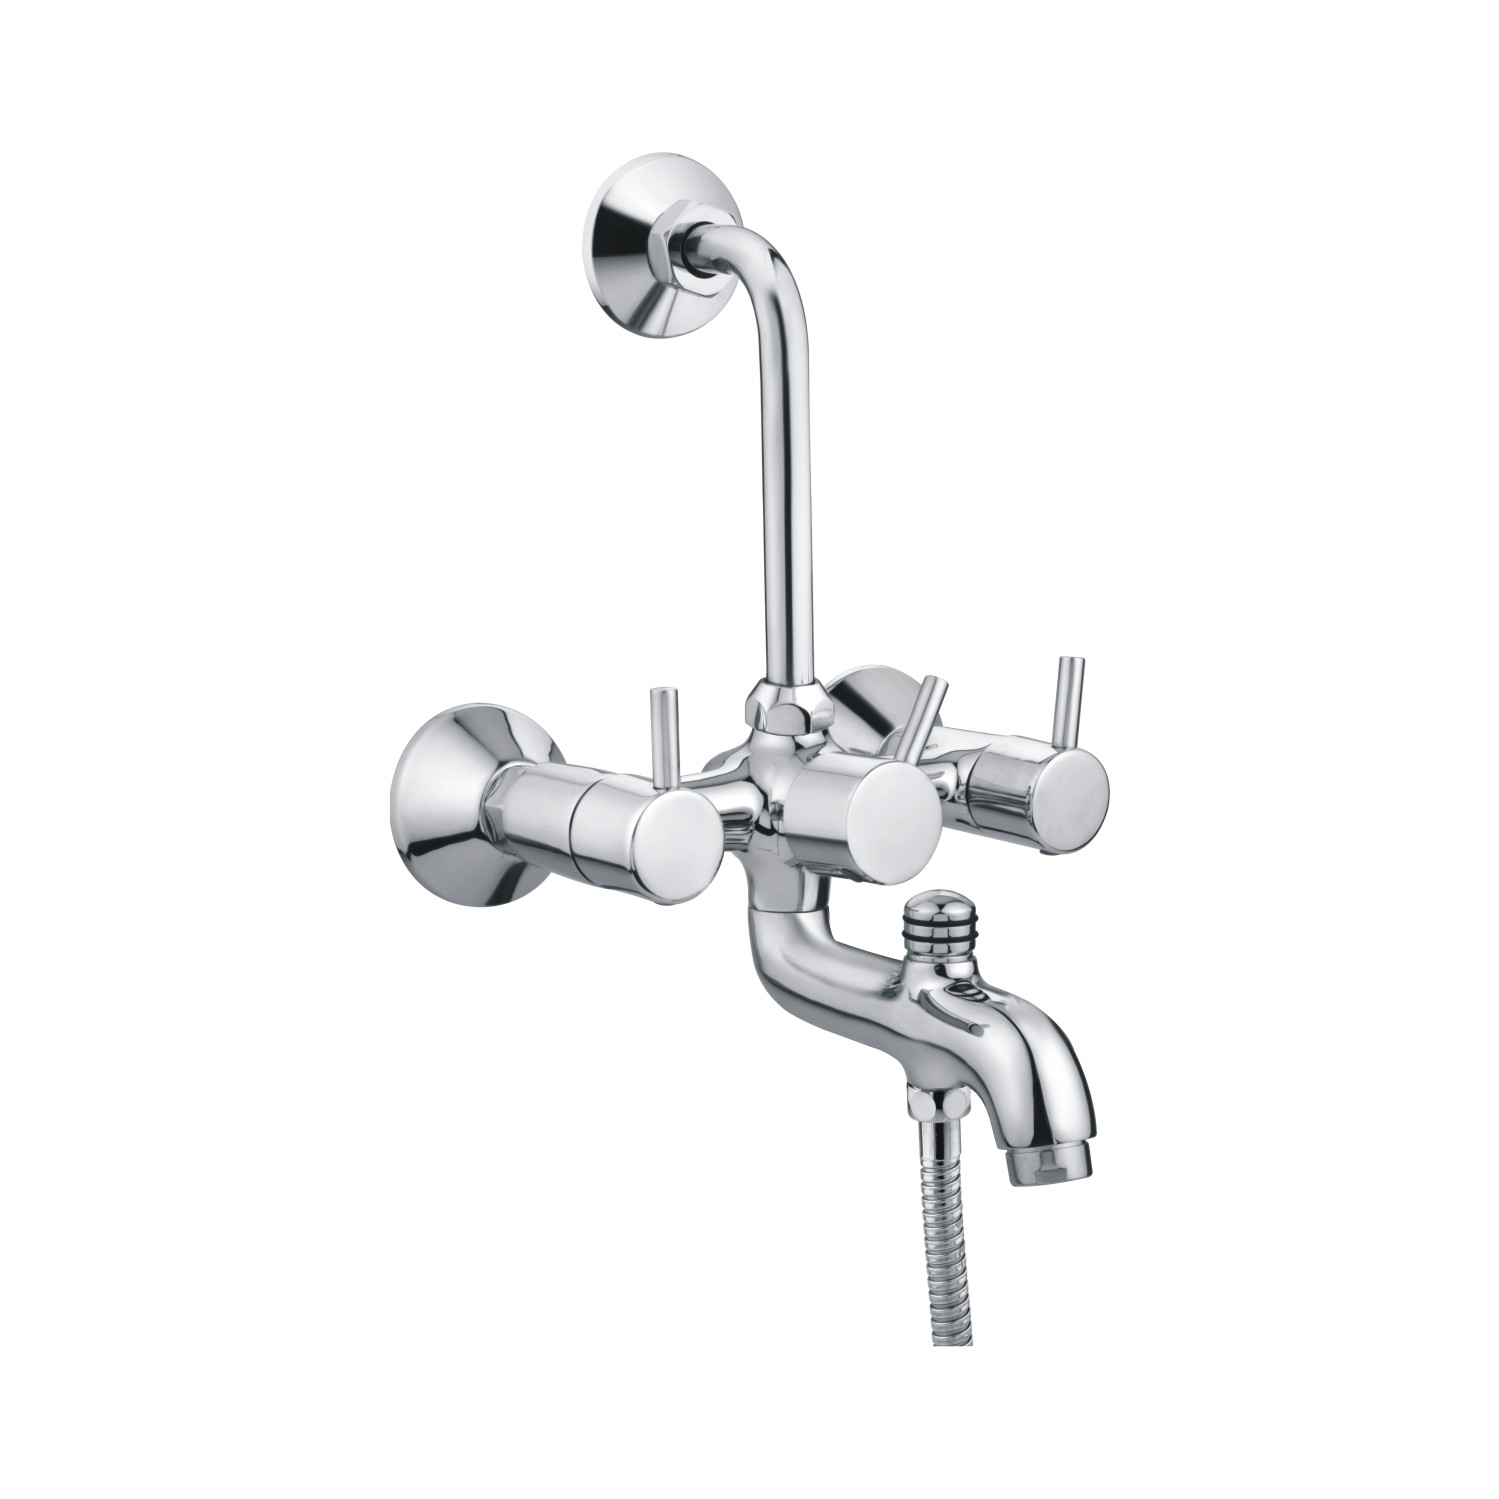 Italik Wall Mixer 3 in 1 with Bend